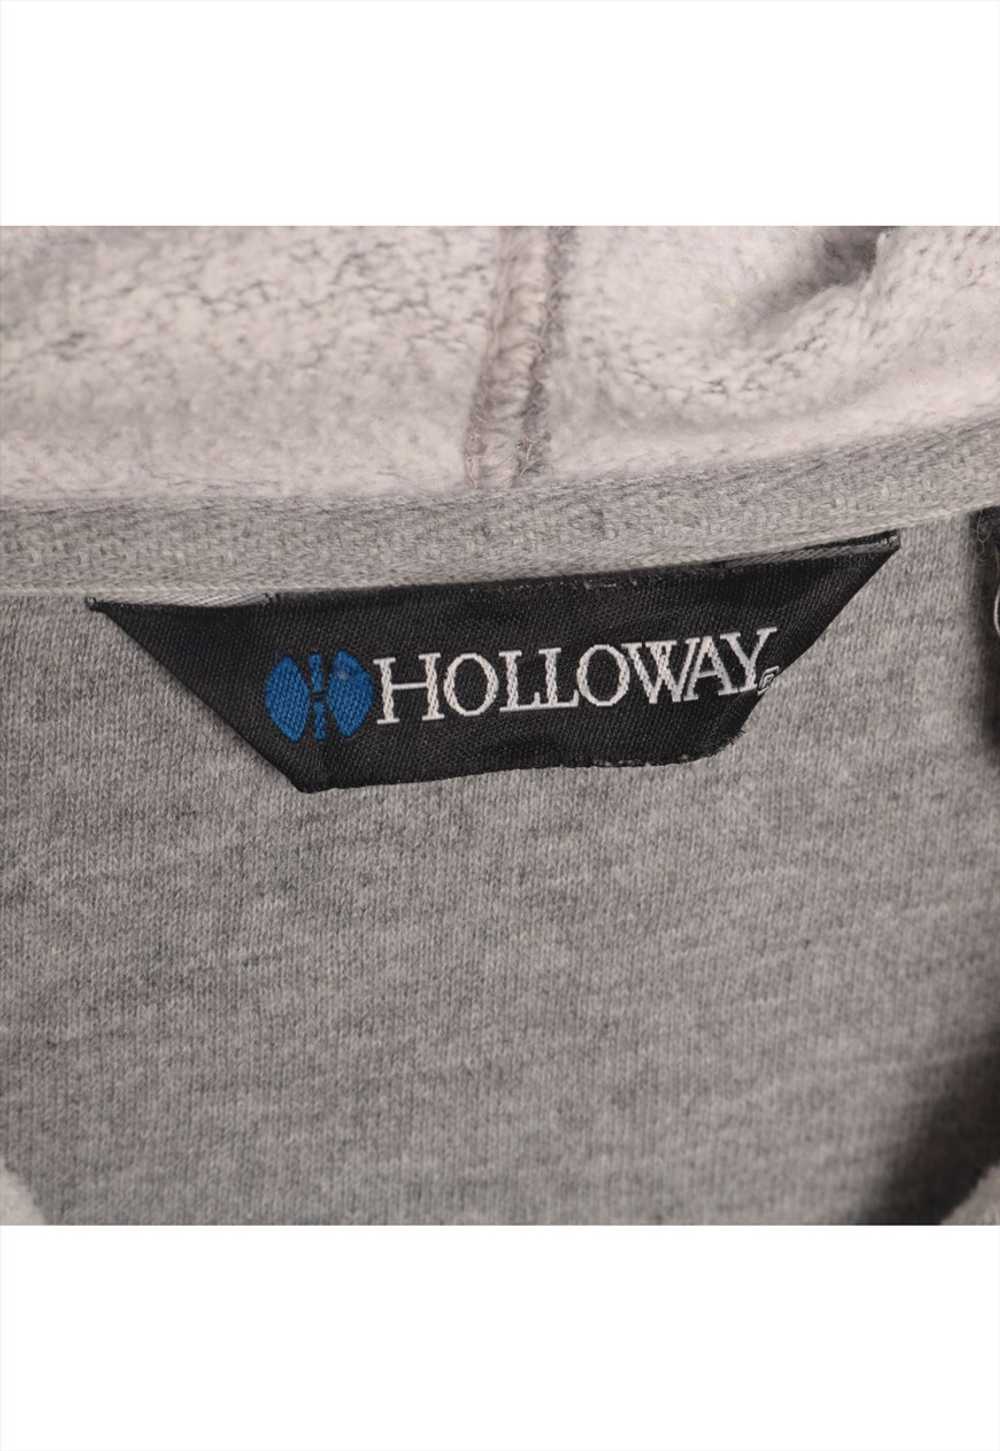 Vintage 90's Holloway Hoodie Embroidered College - image 4